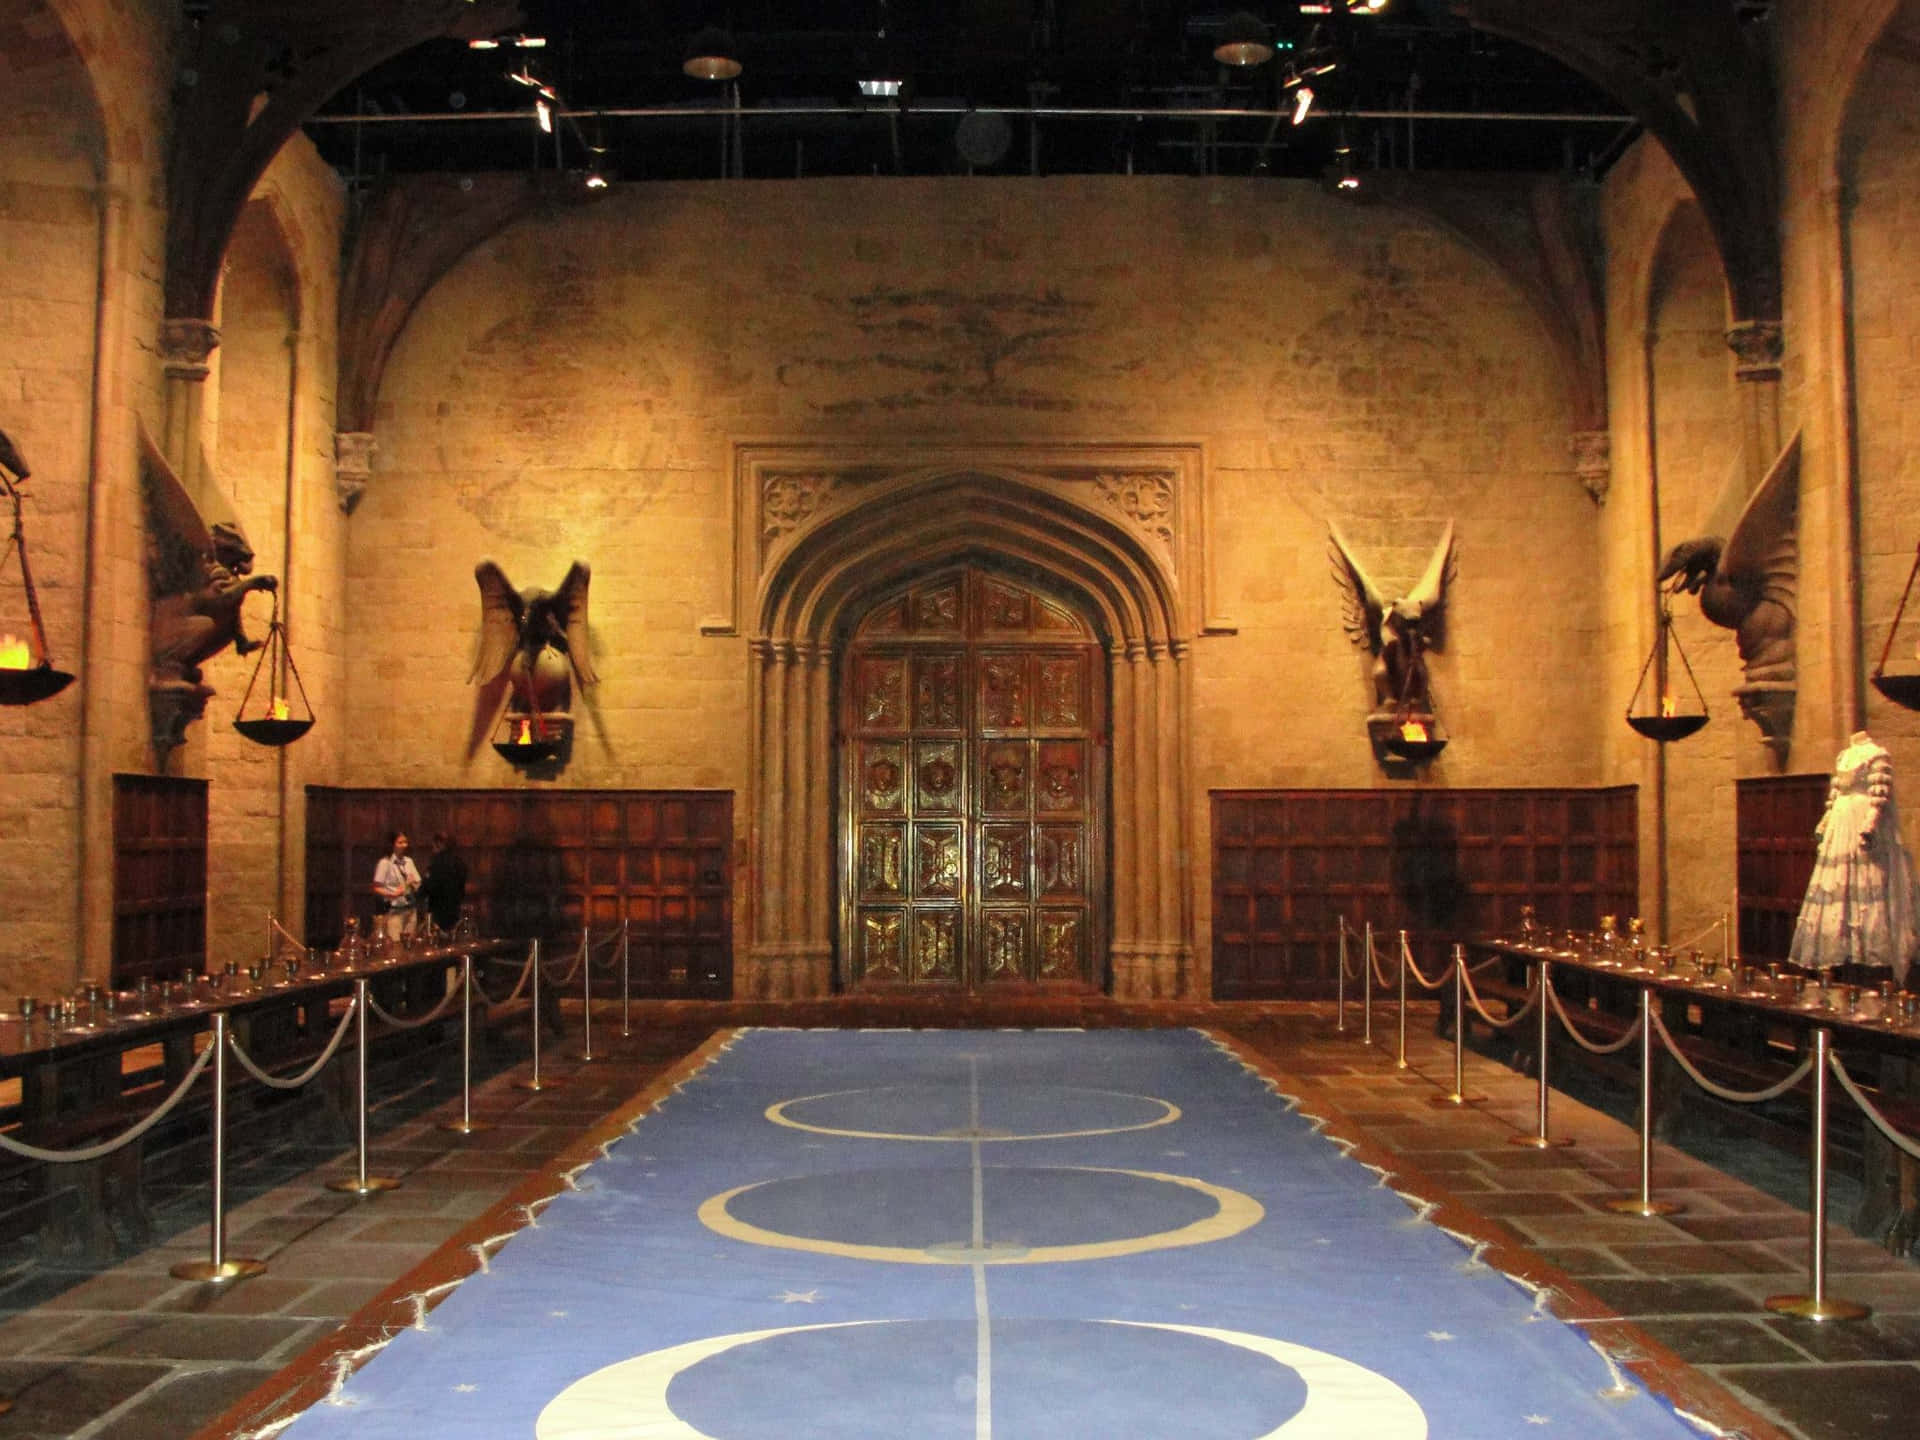 Experience the majesty of the Great Hall of Hogwarts!" Wallpaper